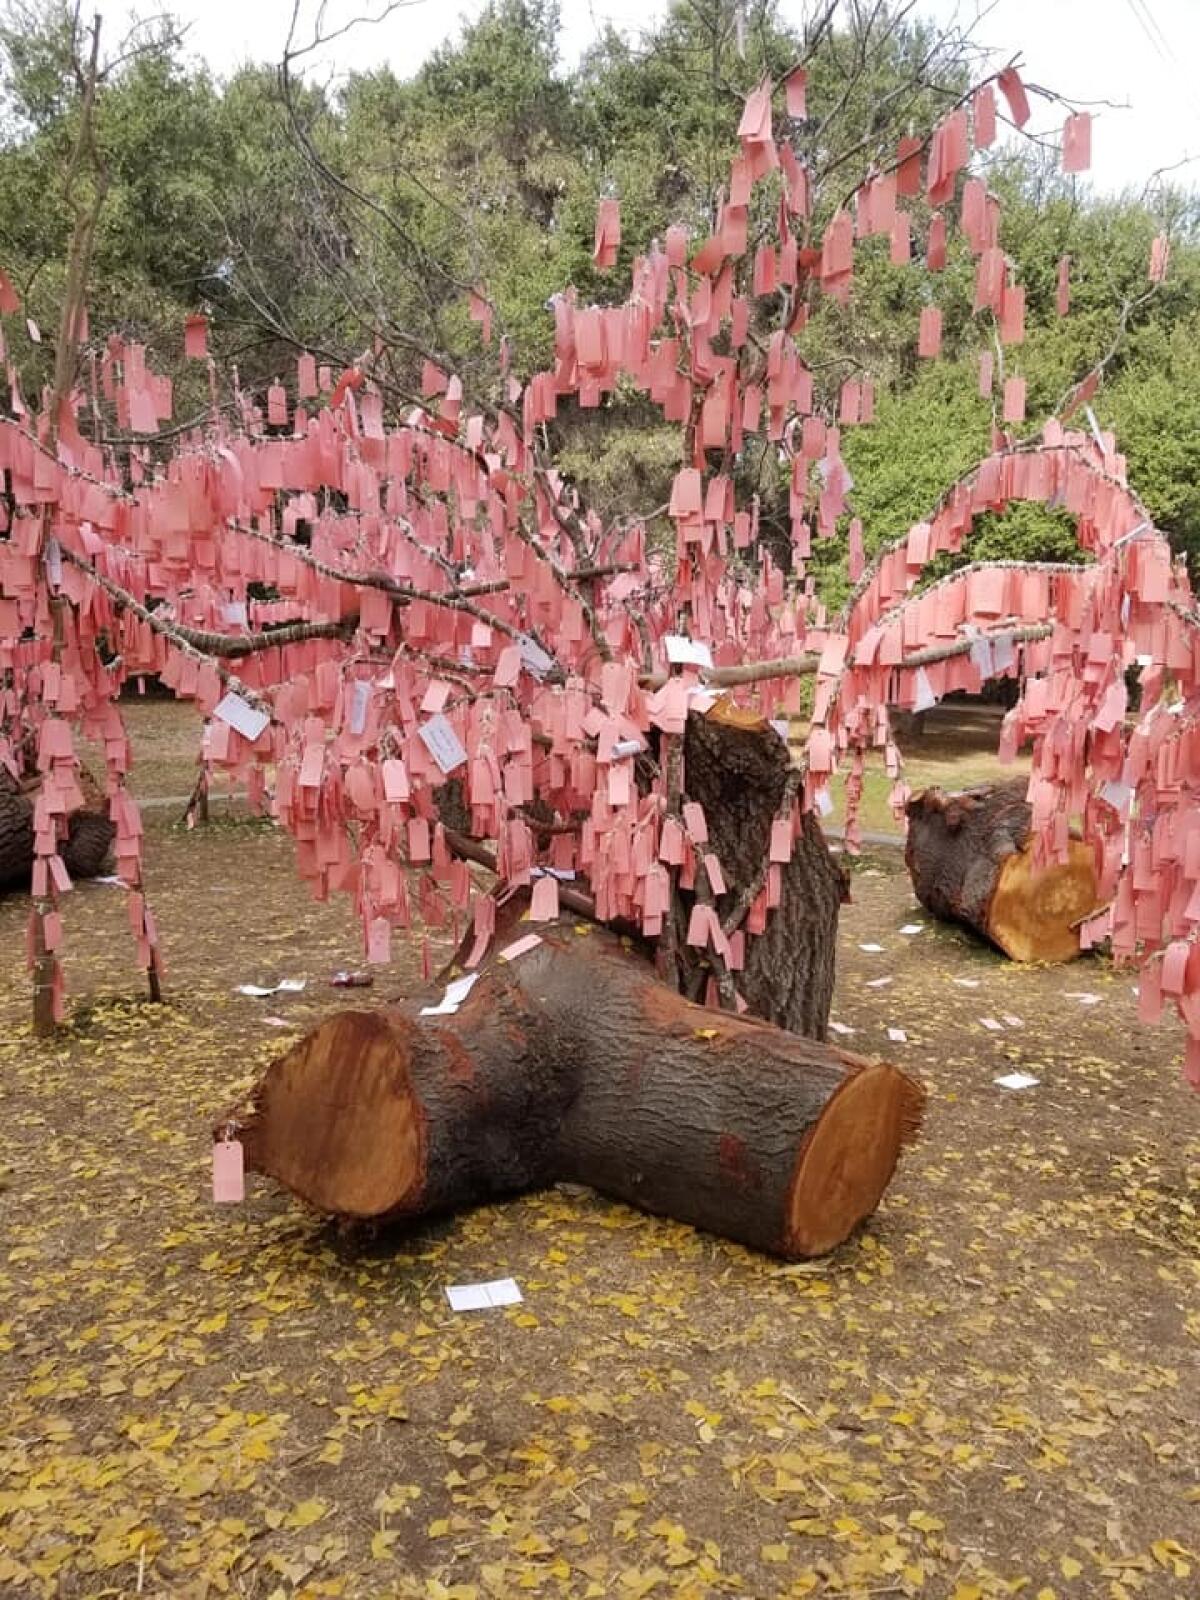 A tree covered with pink cards on which wishes have been written.